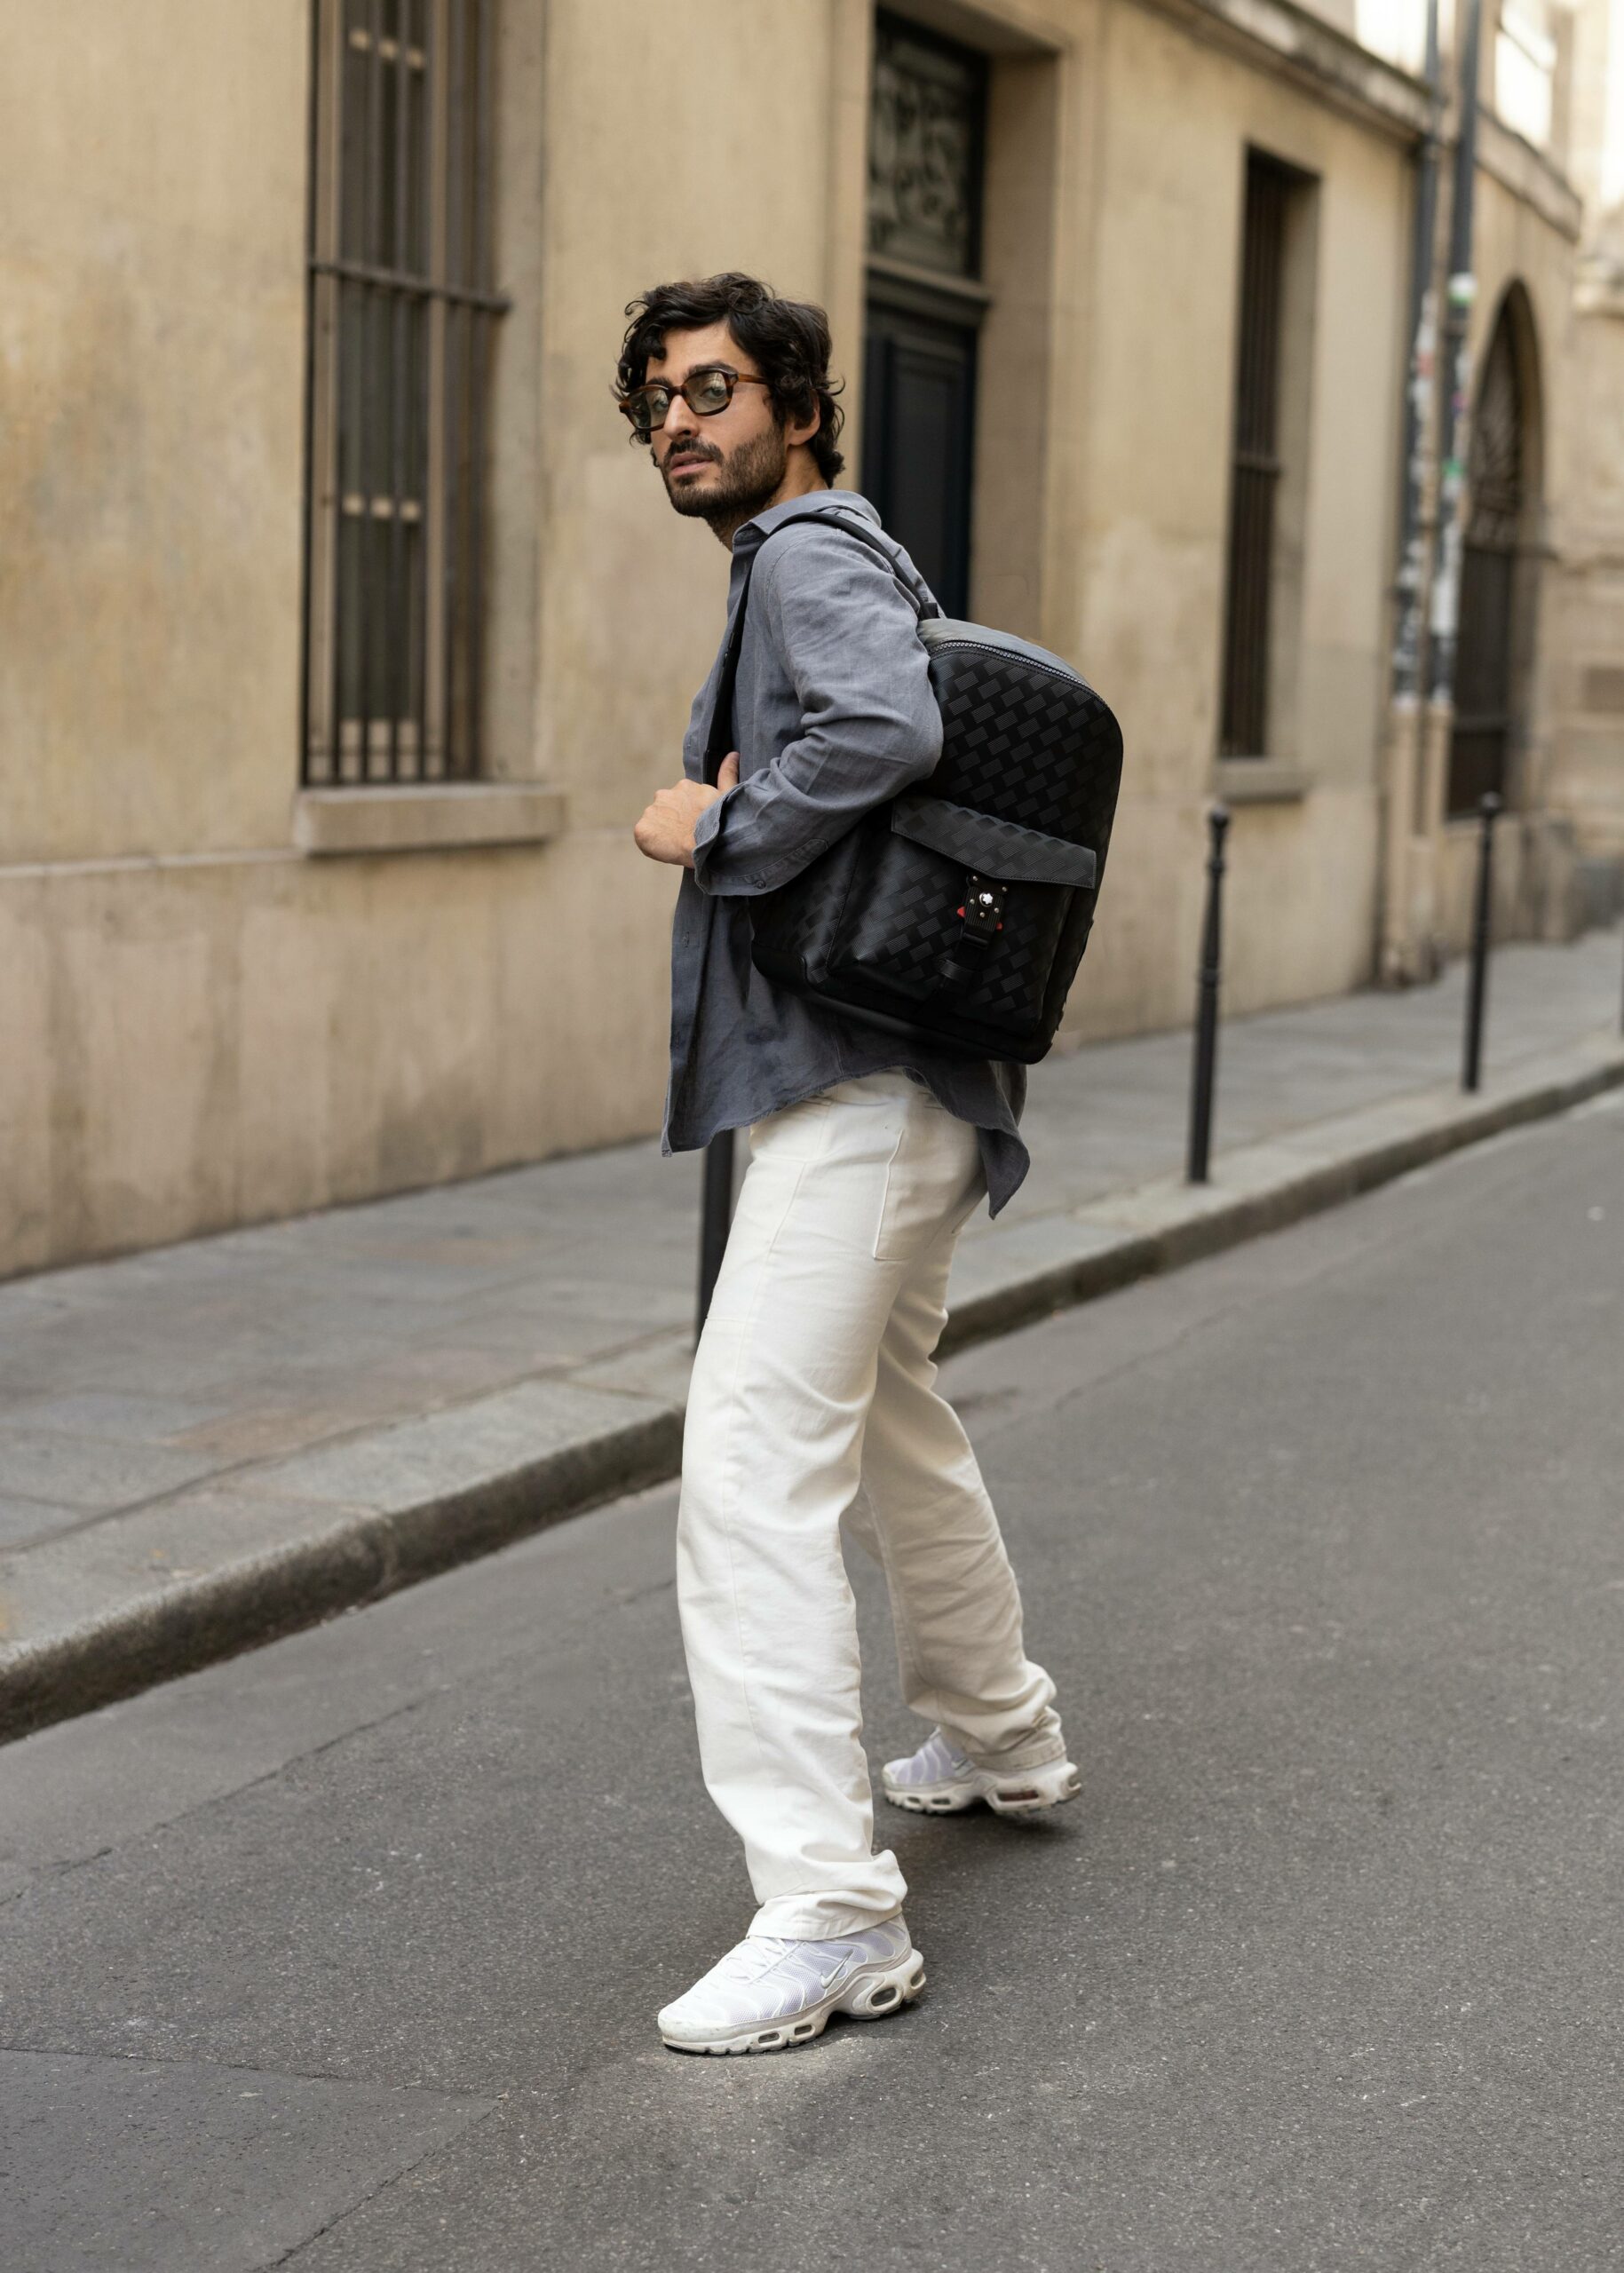 Montblanc Launches “On The Move” Collection At Paris Fashion Week